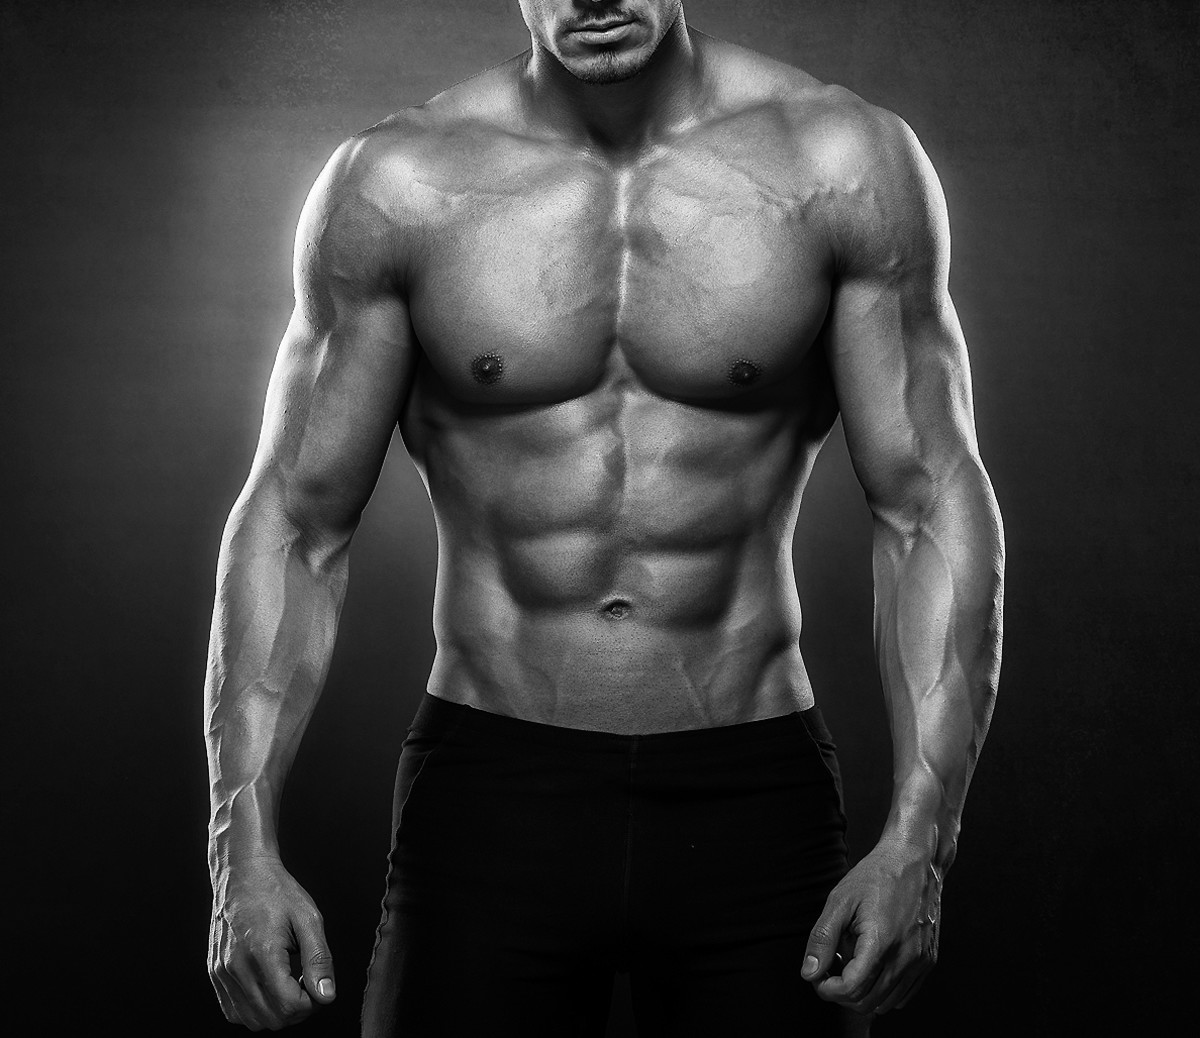 5 ways to look bigger than you really are - Men's Journal